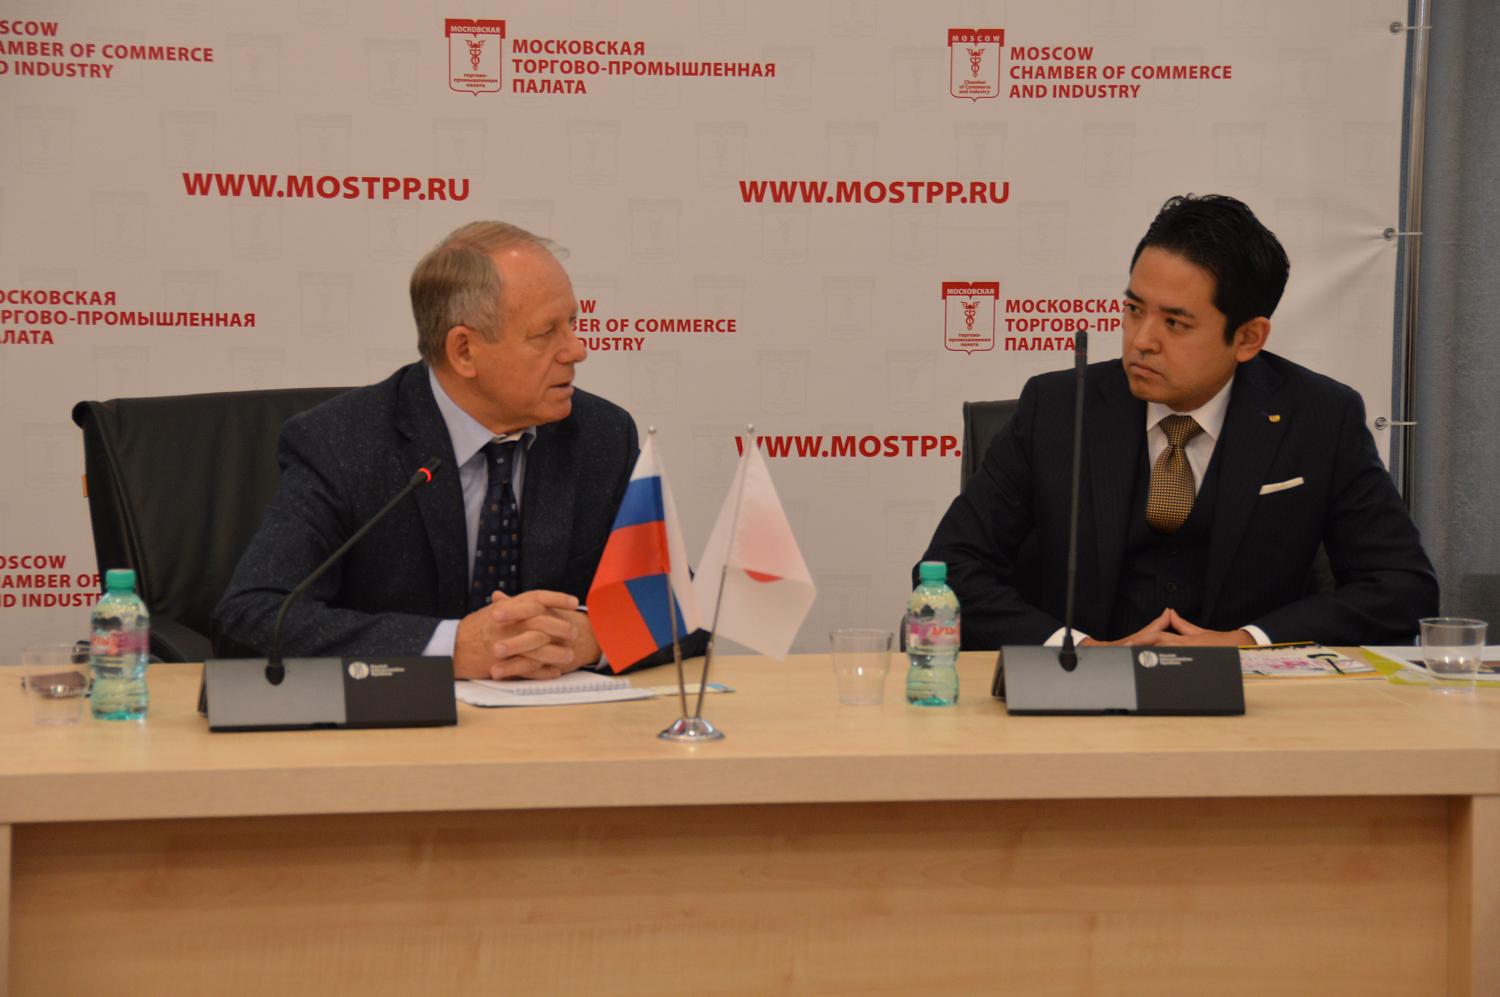 Japanese business is exploring the possibilites for developing its interests in Moscow